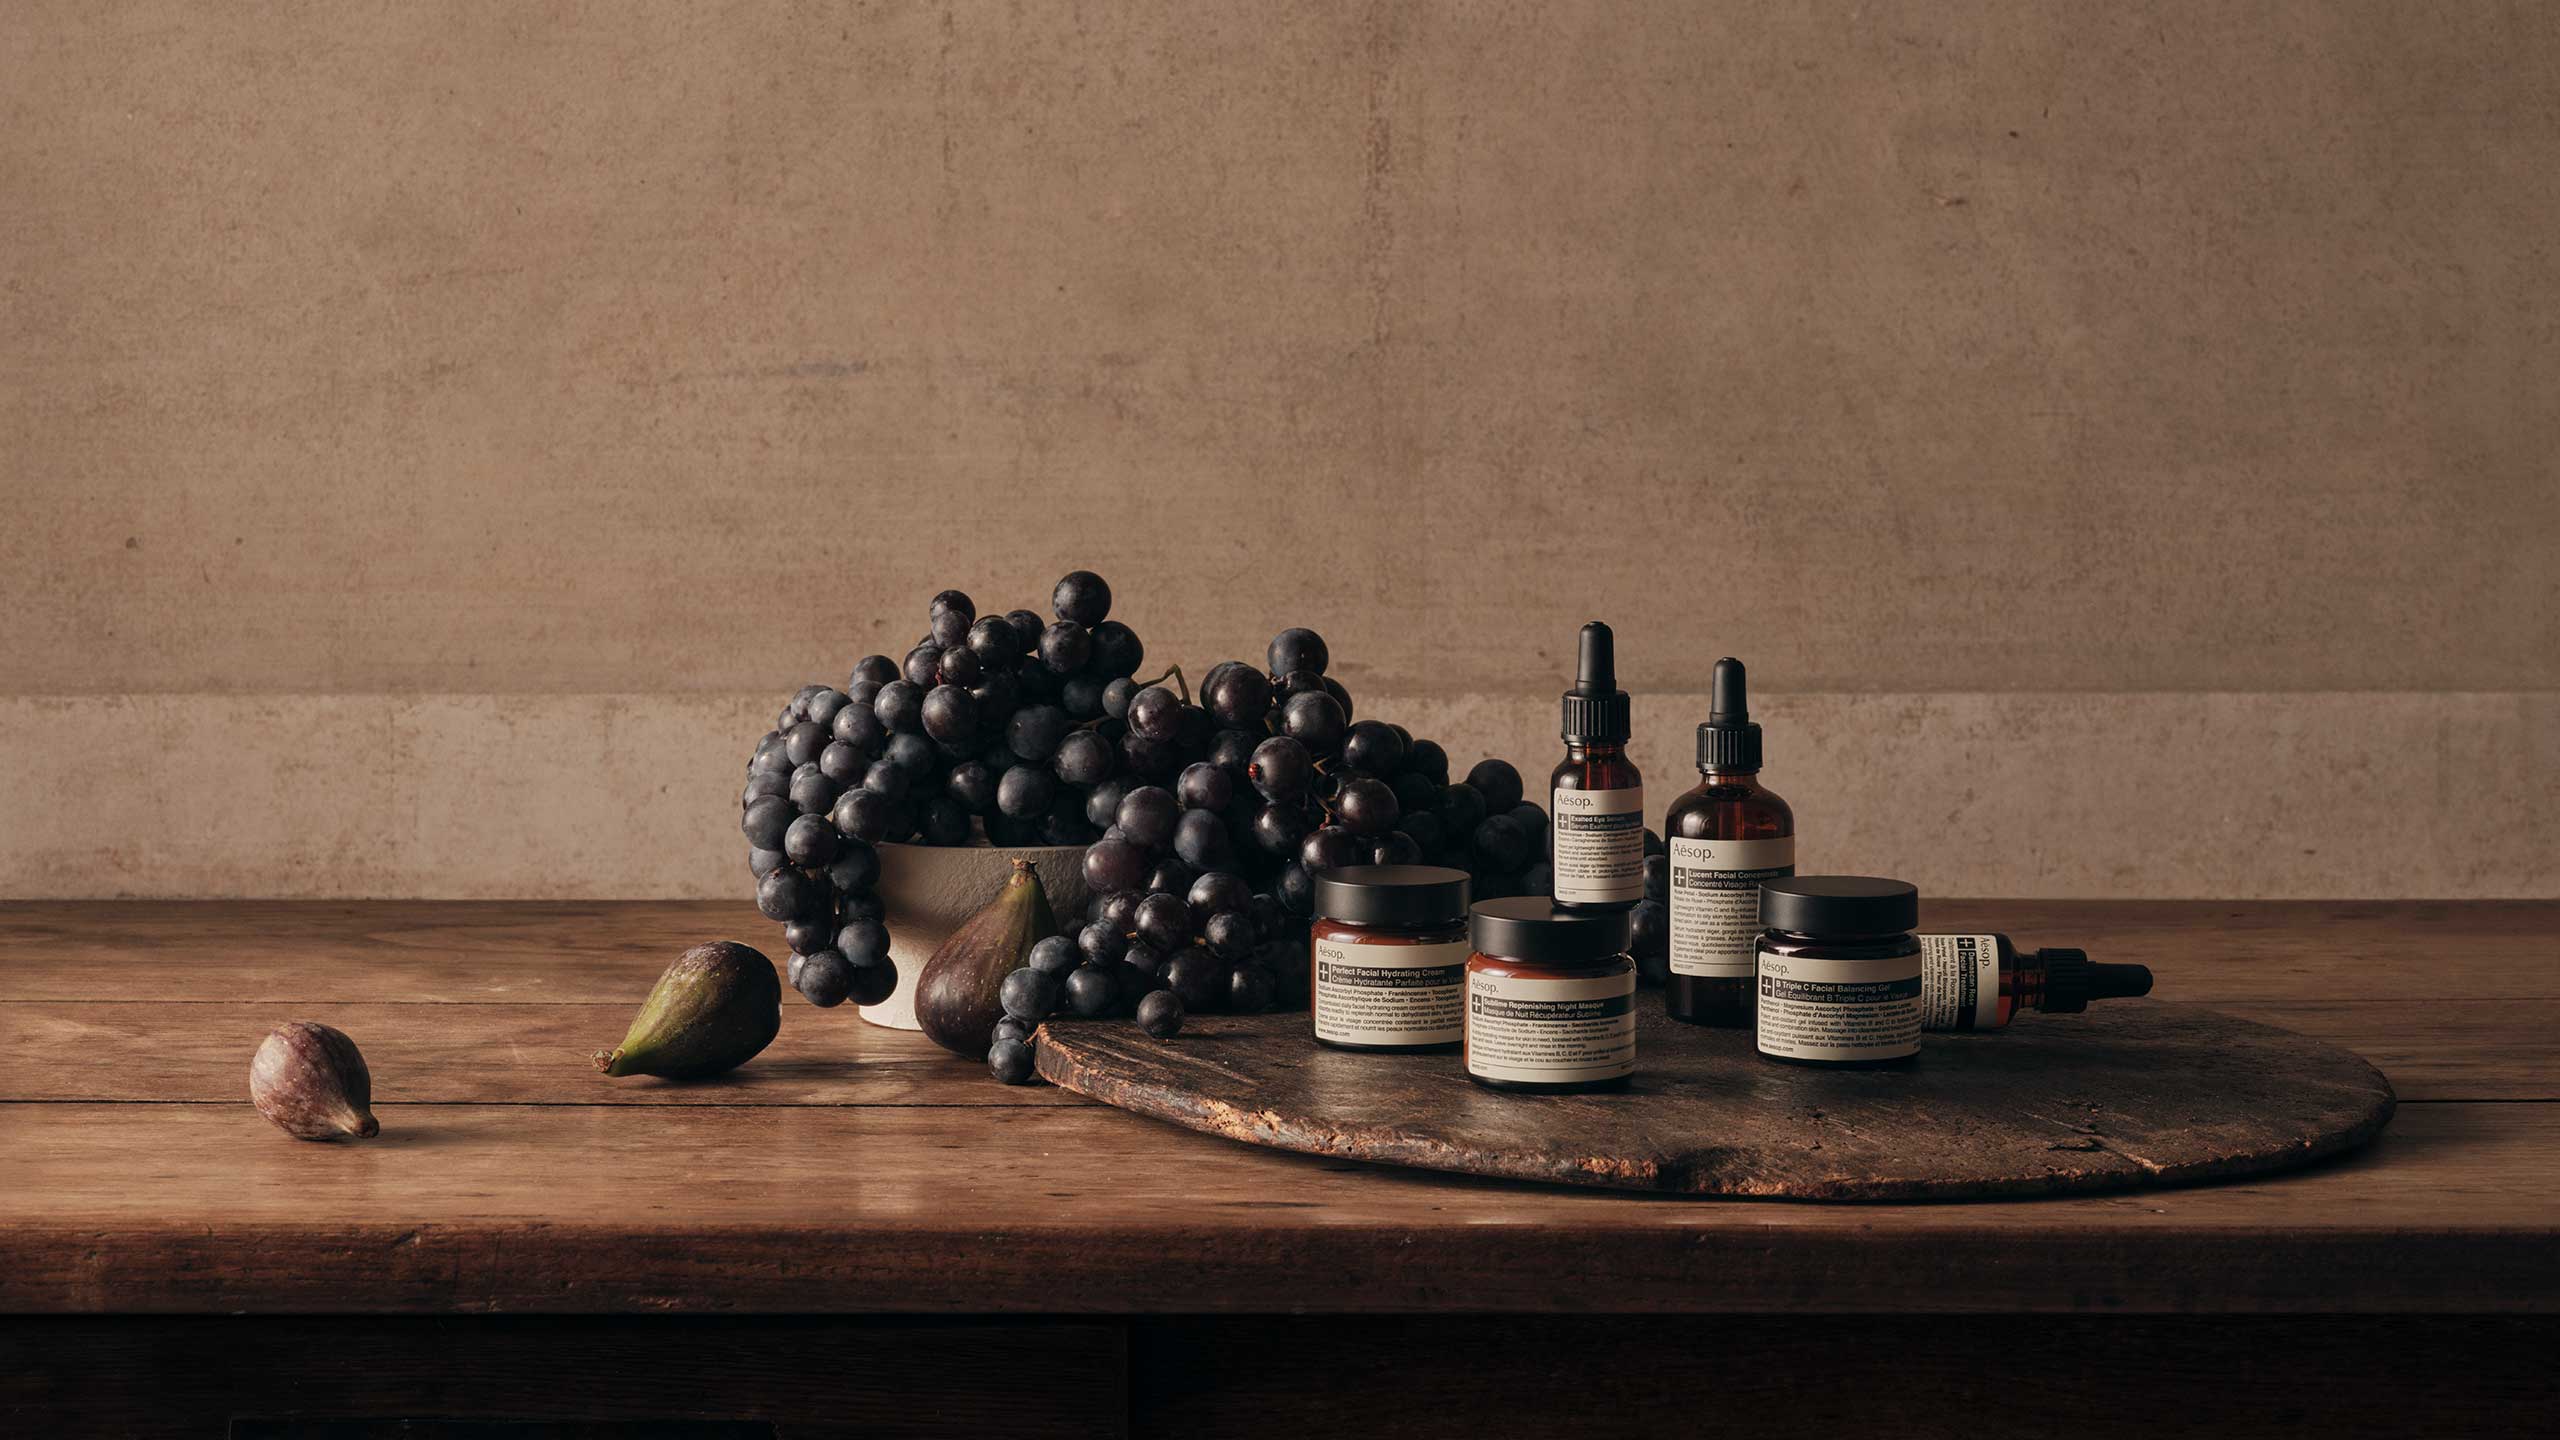 Aesop products sitting alongside a bowl of grapes and figs.